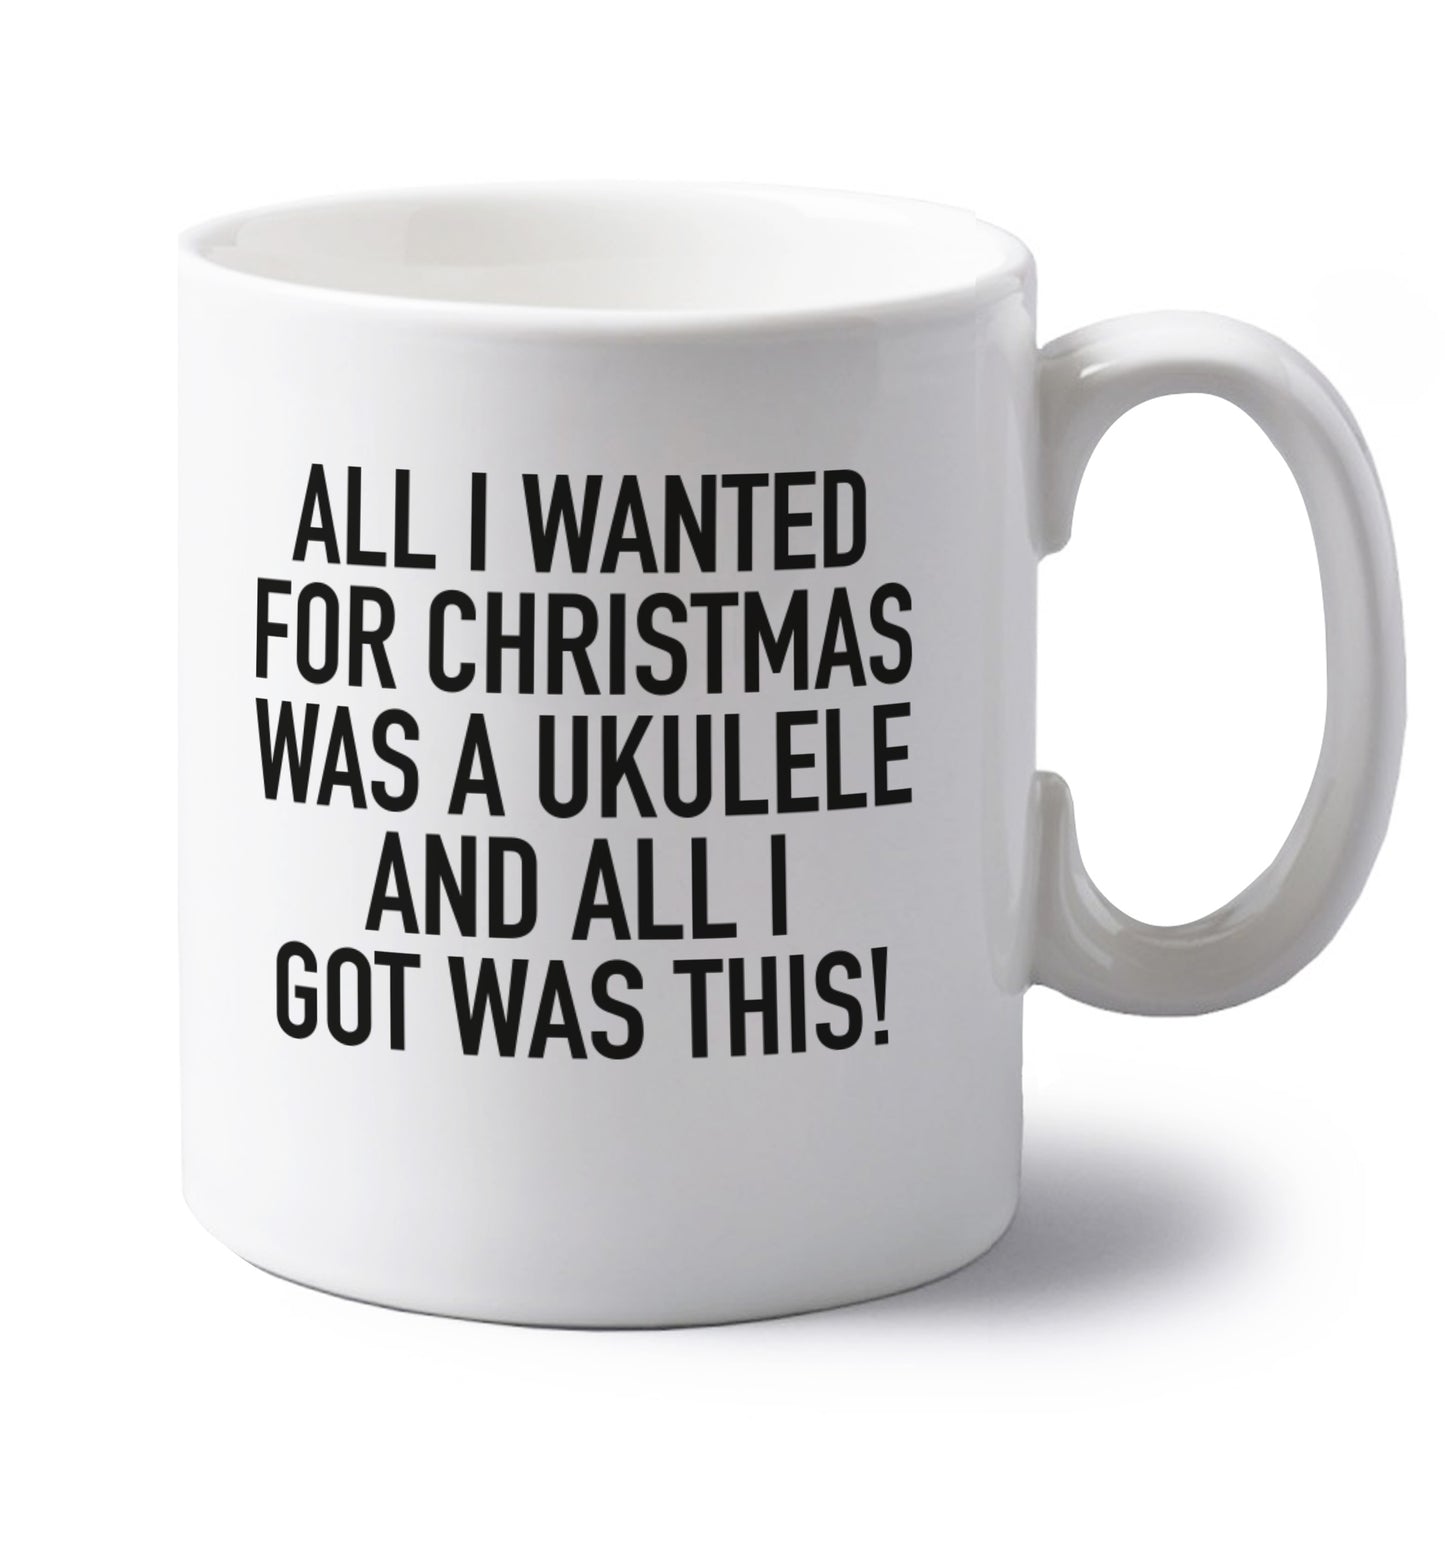 All I wanted for Christmas was a ukulele and all I got was this! left handed white ceramic mug 